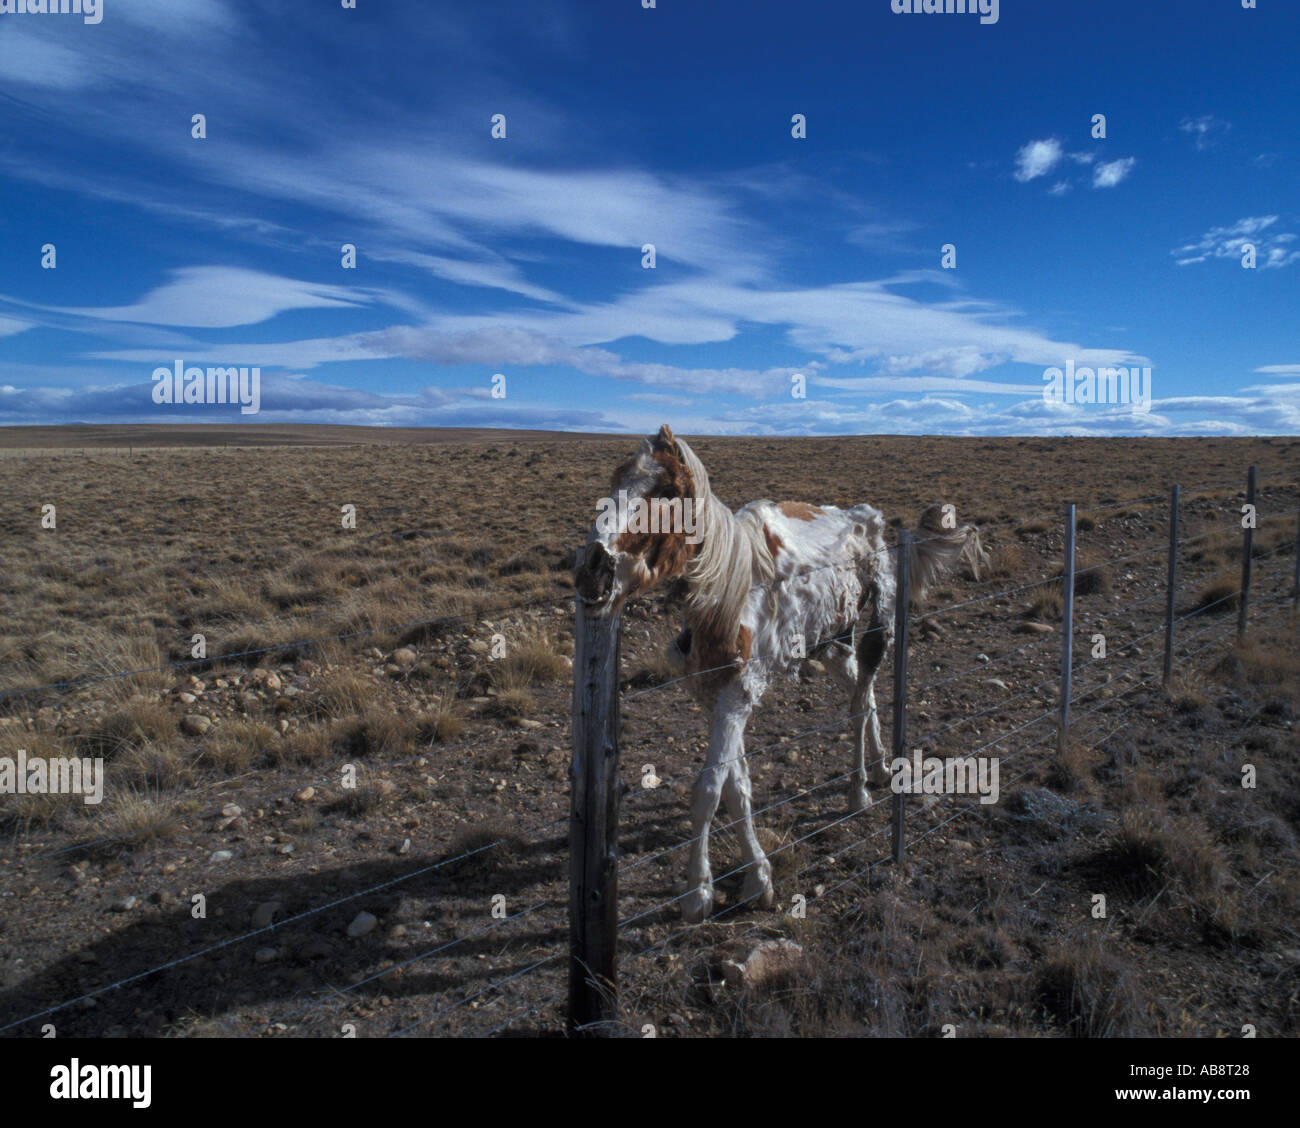 Carcass of paint horse standing along fence line, Patagonia Argentina Stock Photo